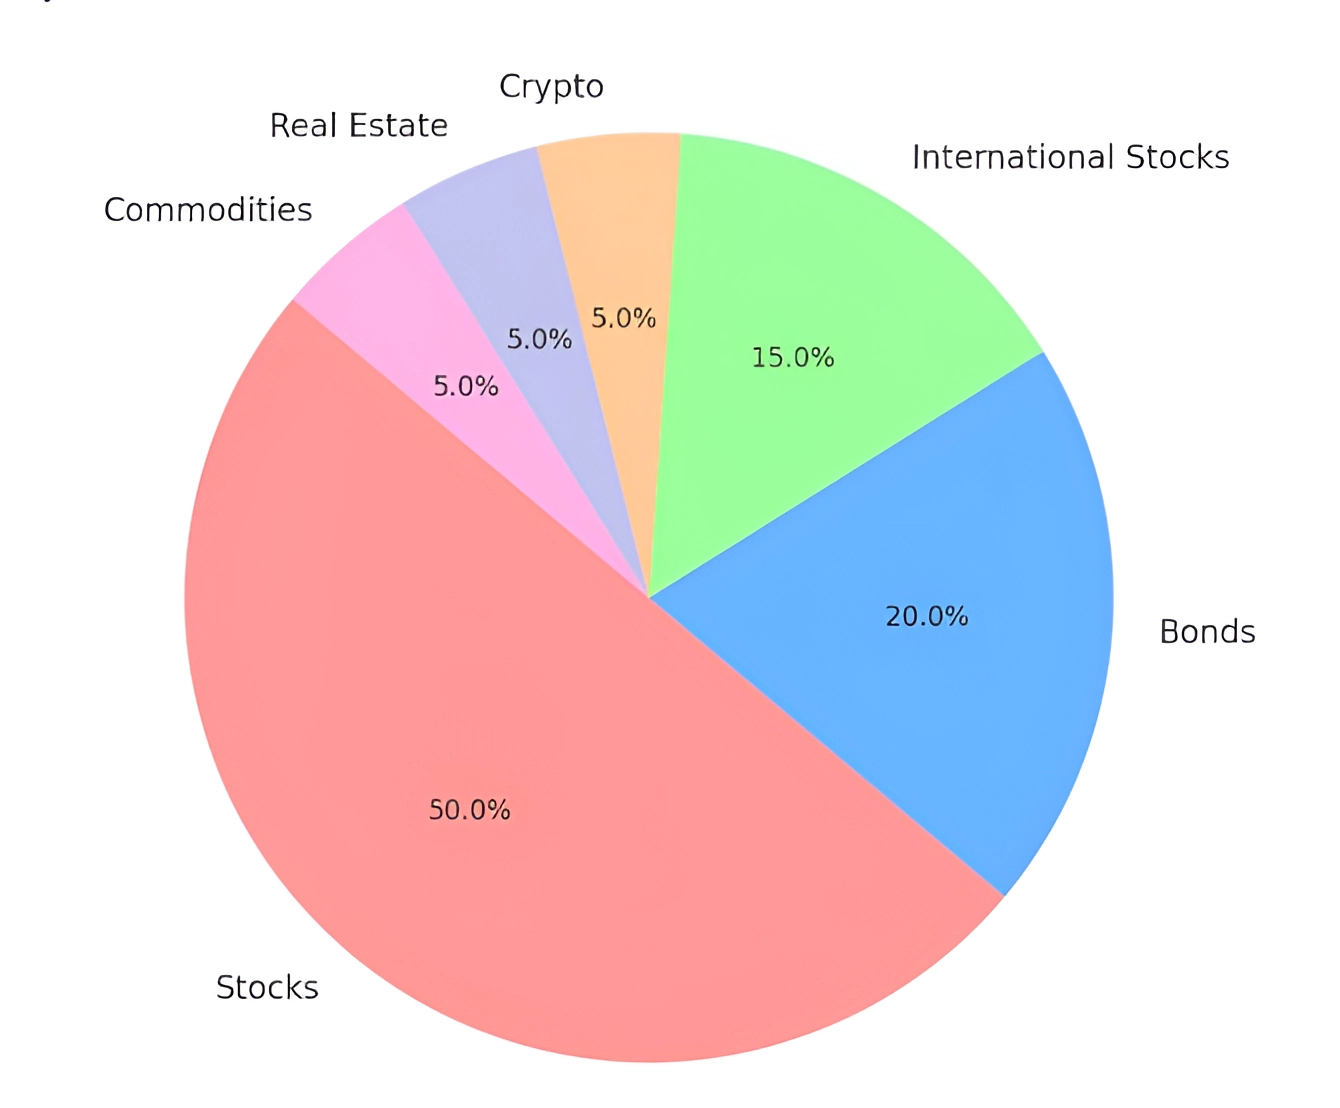 An example of a well diversified portfolio